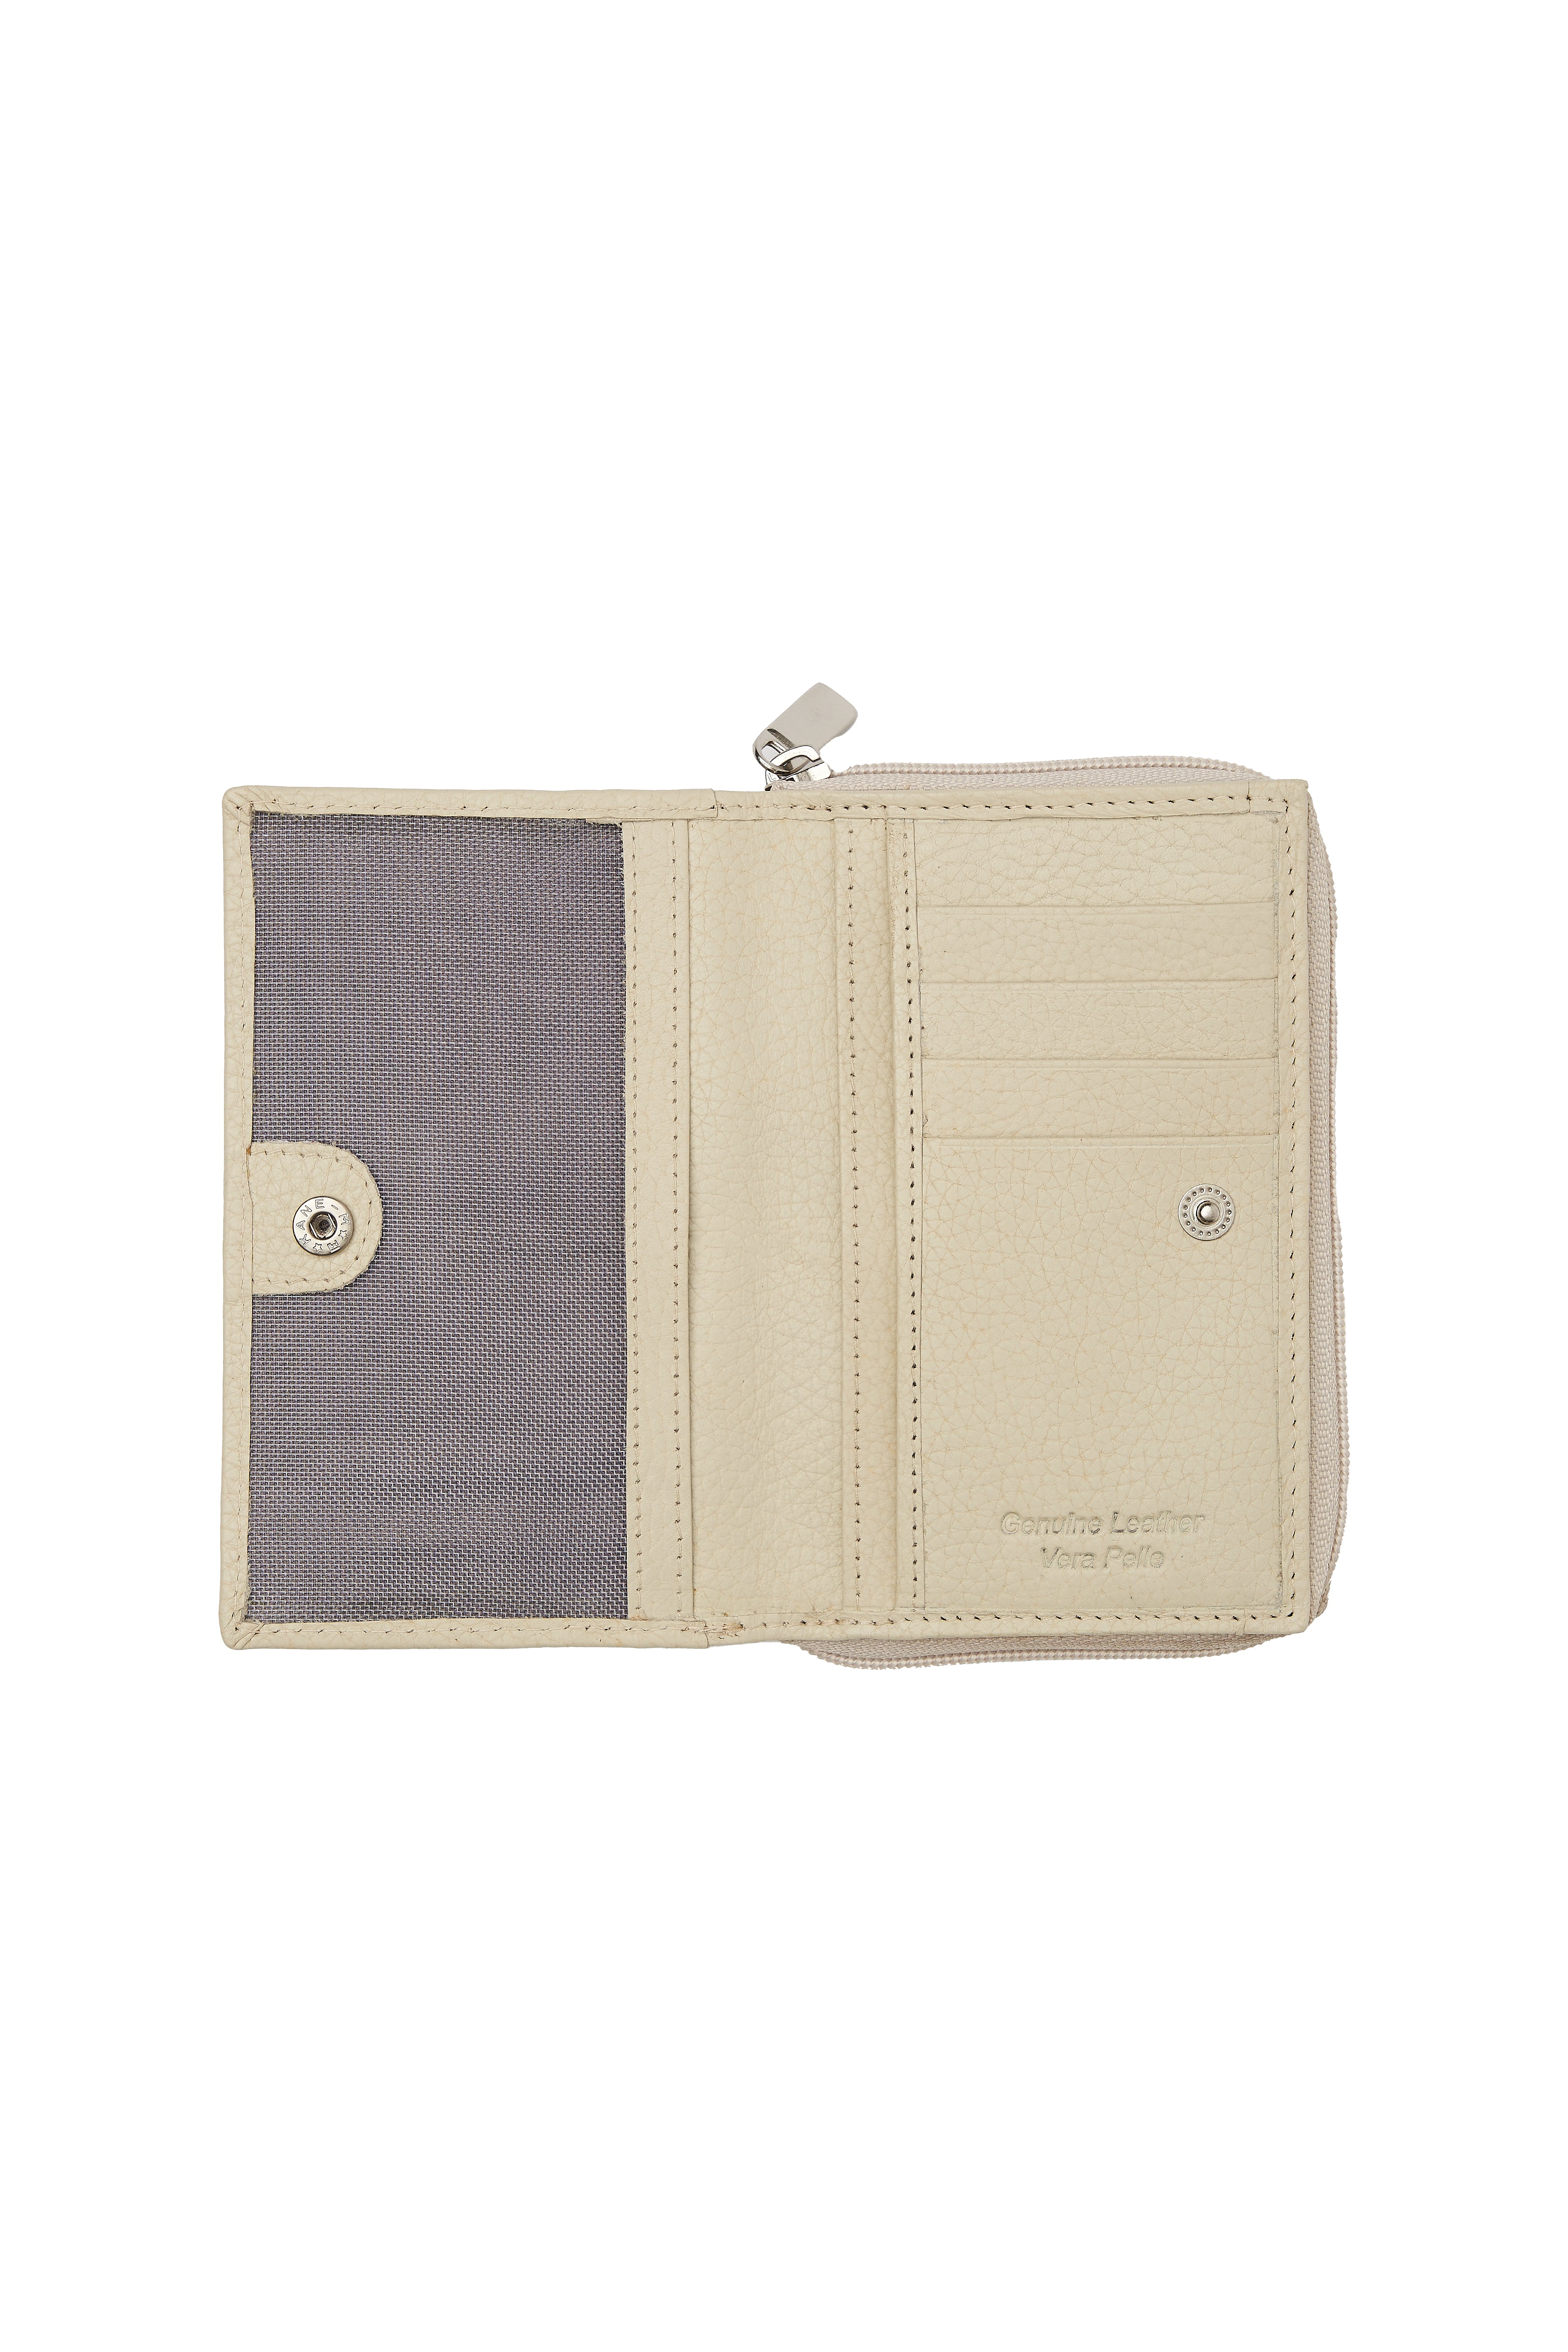 LEATHER SAND-COLORED WALLET